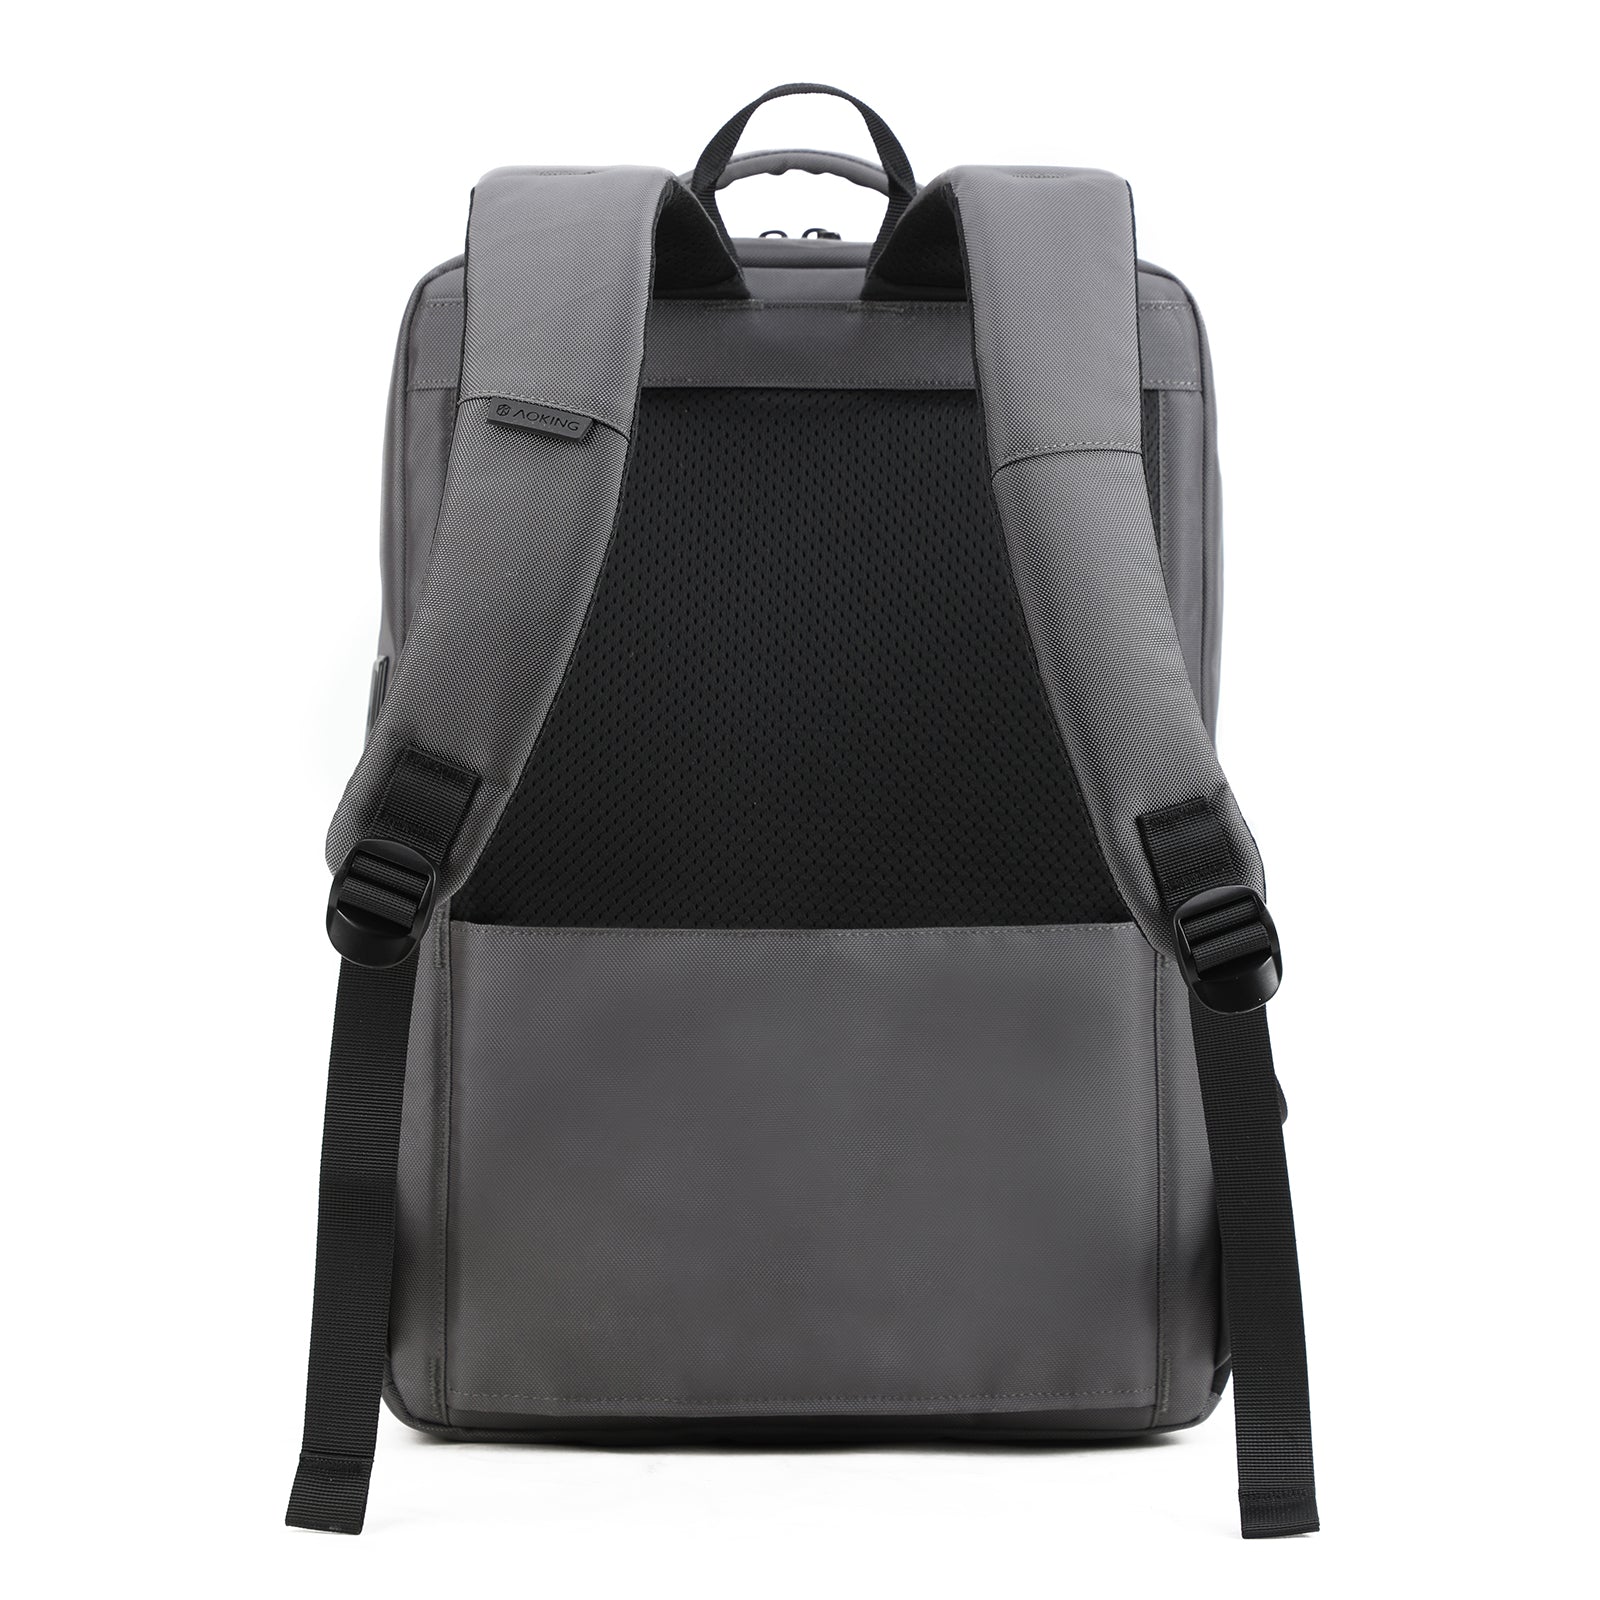 Aoking Business Laptop Backpack SN1428 Grey